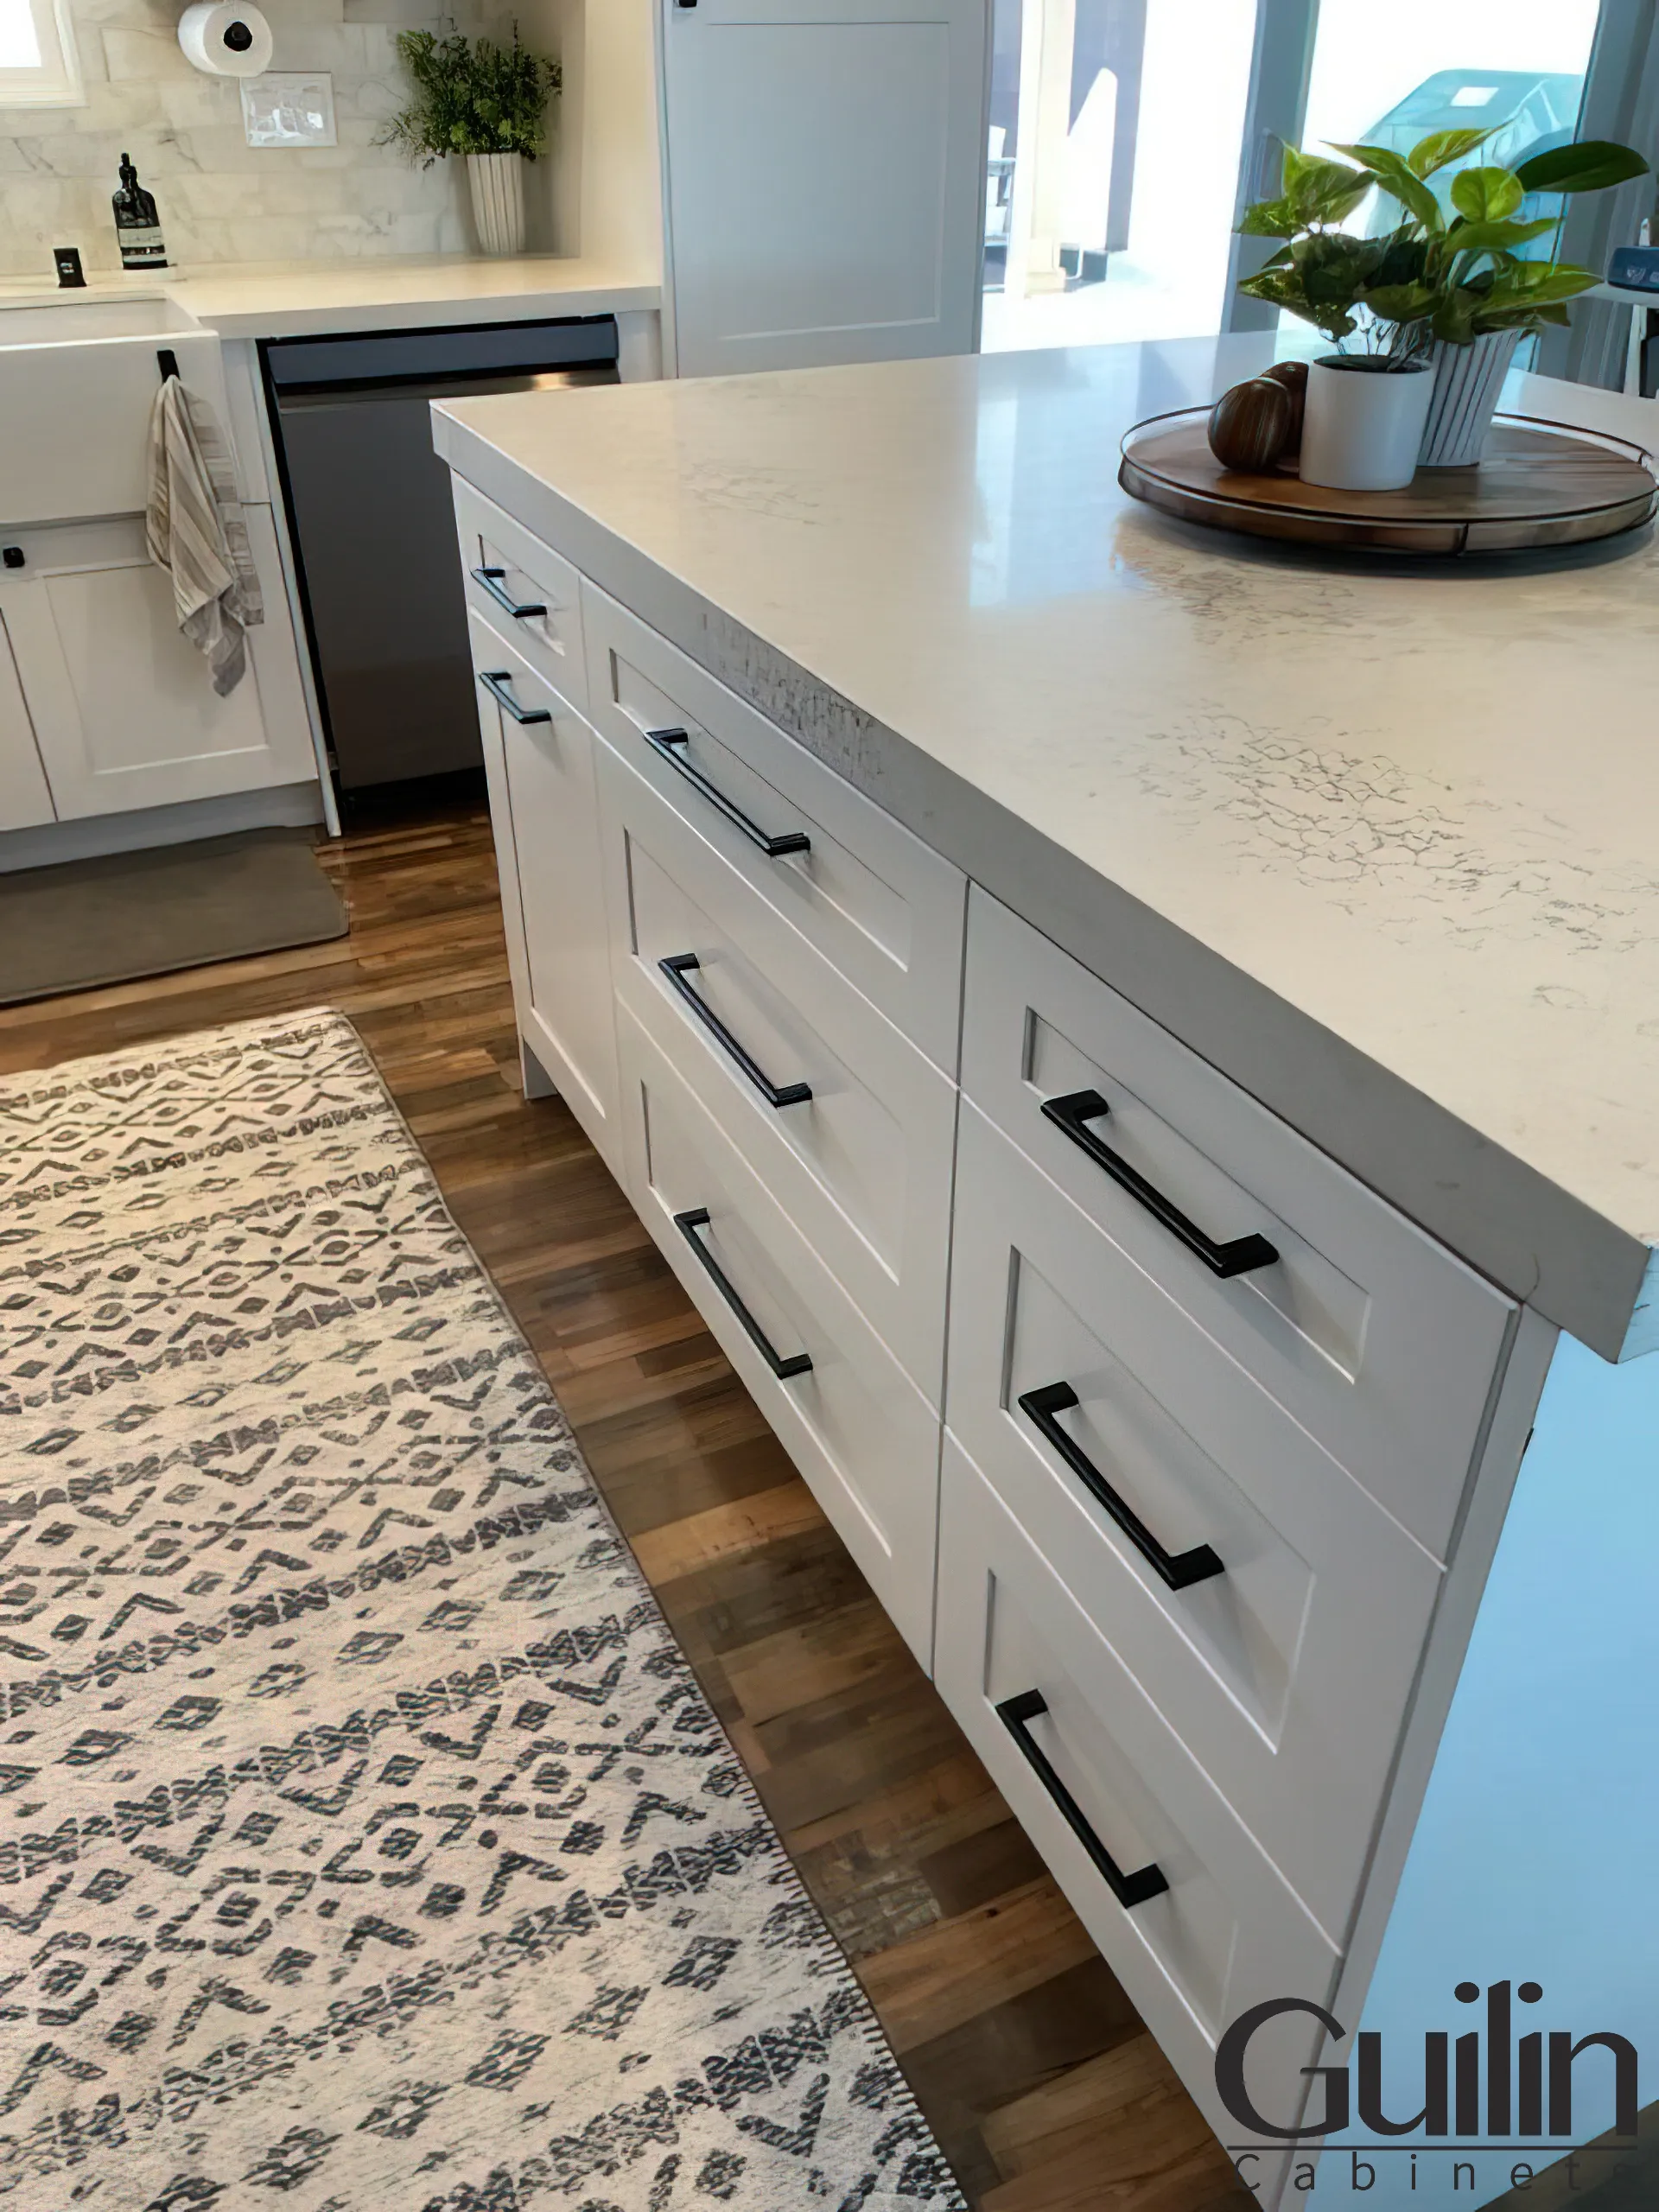 Drawer base cabinets provide easy access to your kitchen essentials